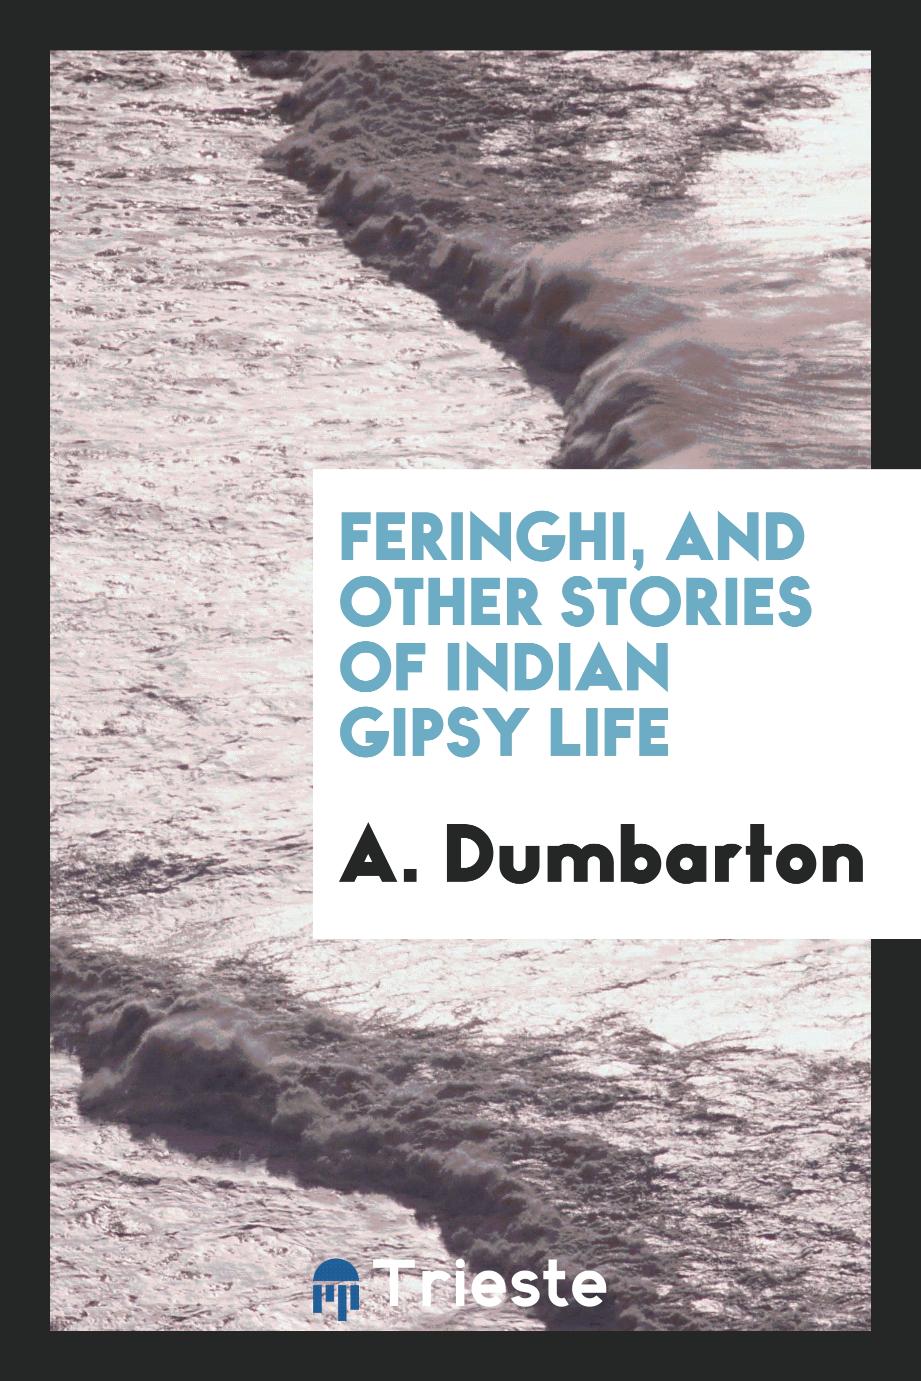 Feringhi, and other stories of Indian gipsy life